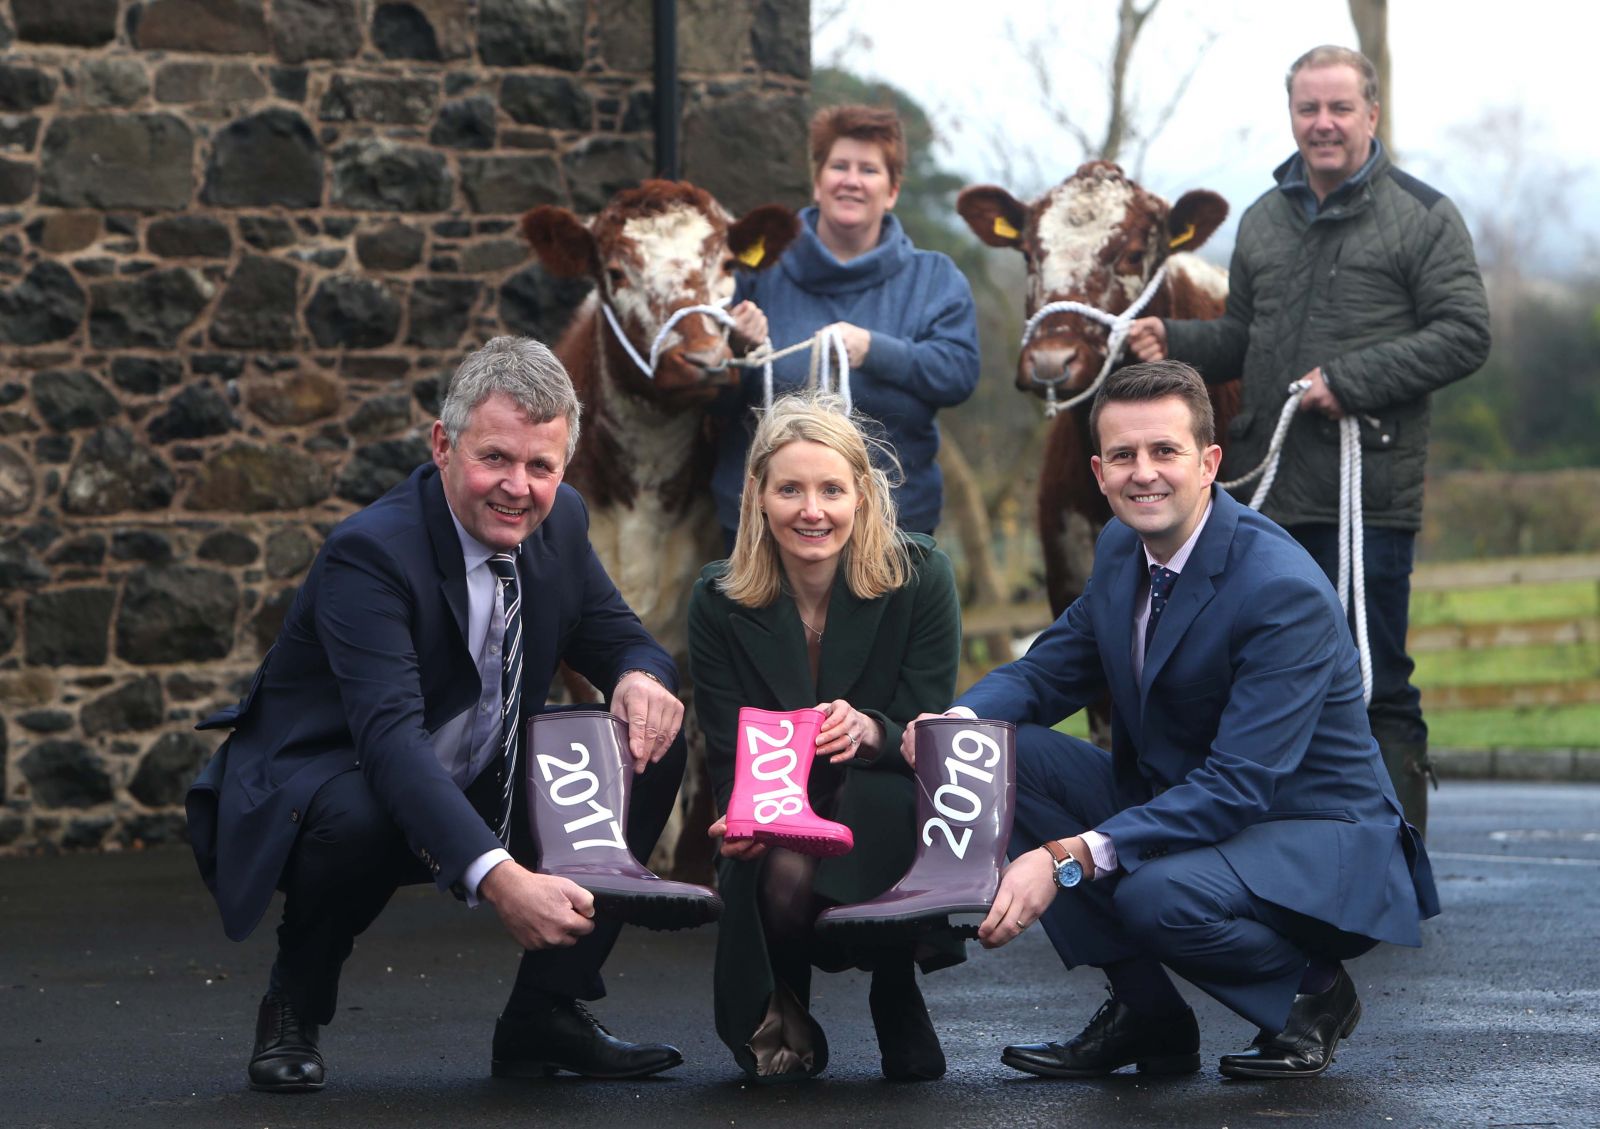 Title sponsor of Bank of Ireland Open Farm Weekend, Bank of Ireland UK, has announced it will continue its support for a further 3 years.